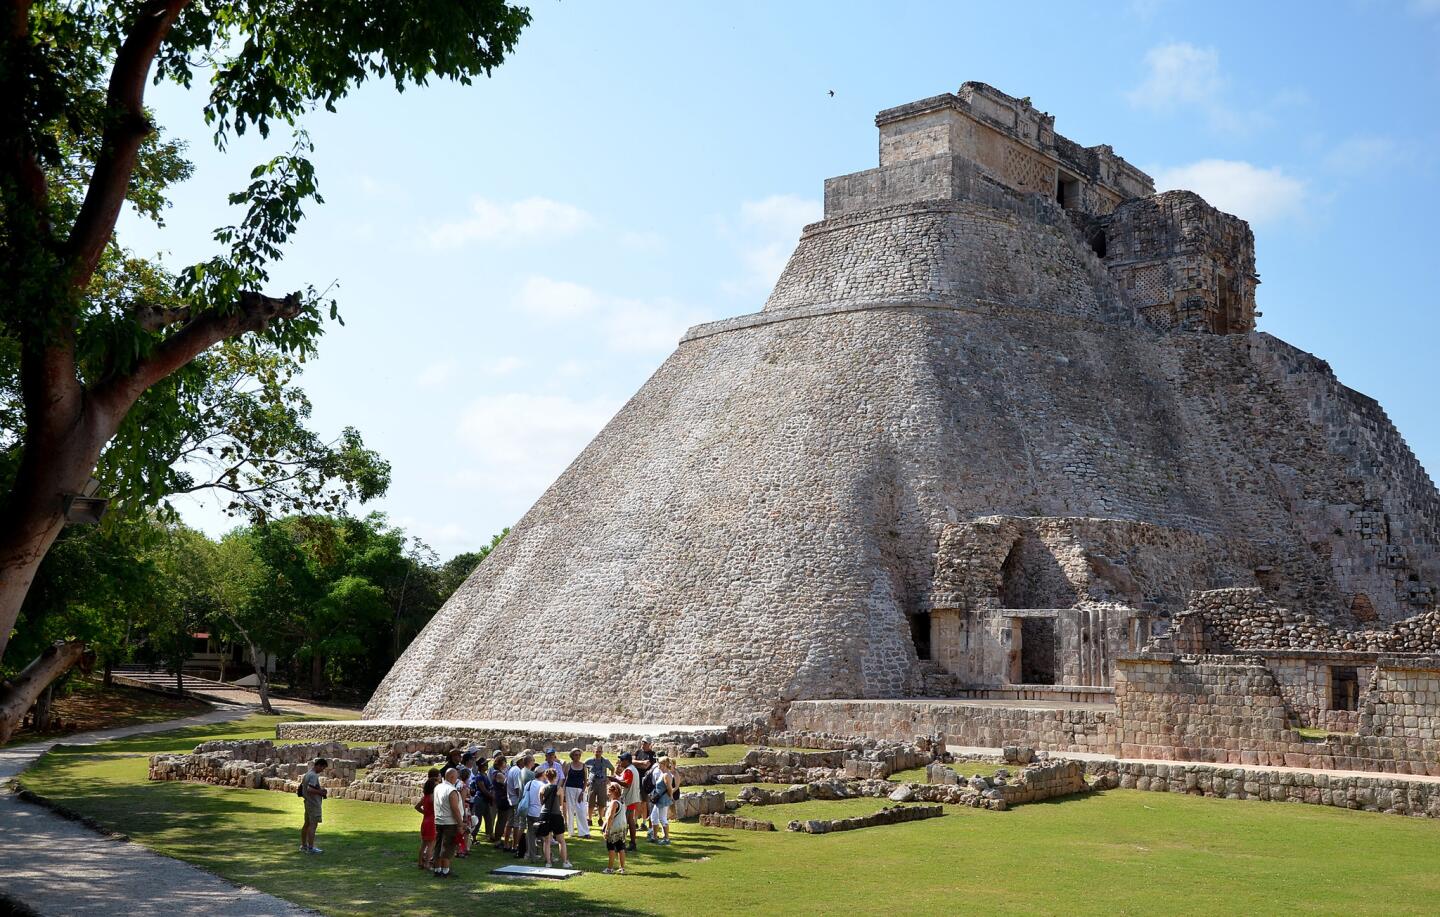 Of the many treasures in Mexico's Yucatán Peninsula, including ruins like the Pyramid of the Magician in Uxmal, temperate weather and the vestiges of cacao culture may be the most surprising.